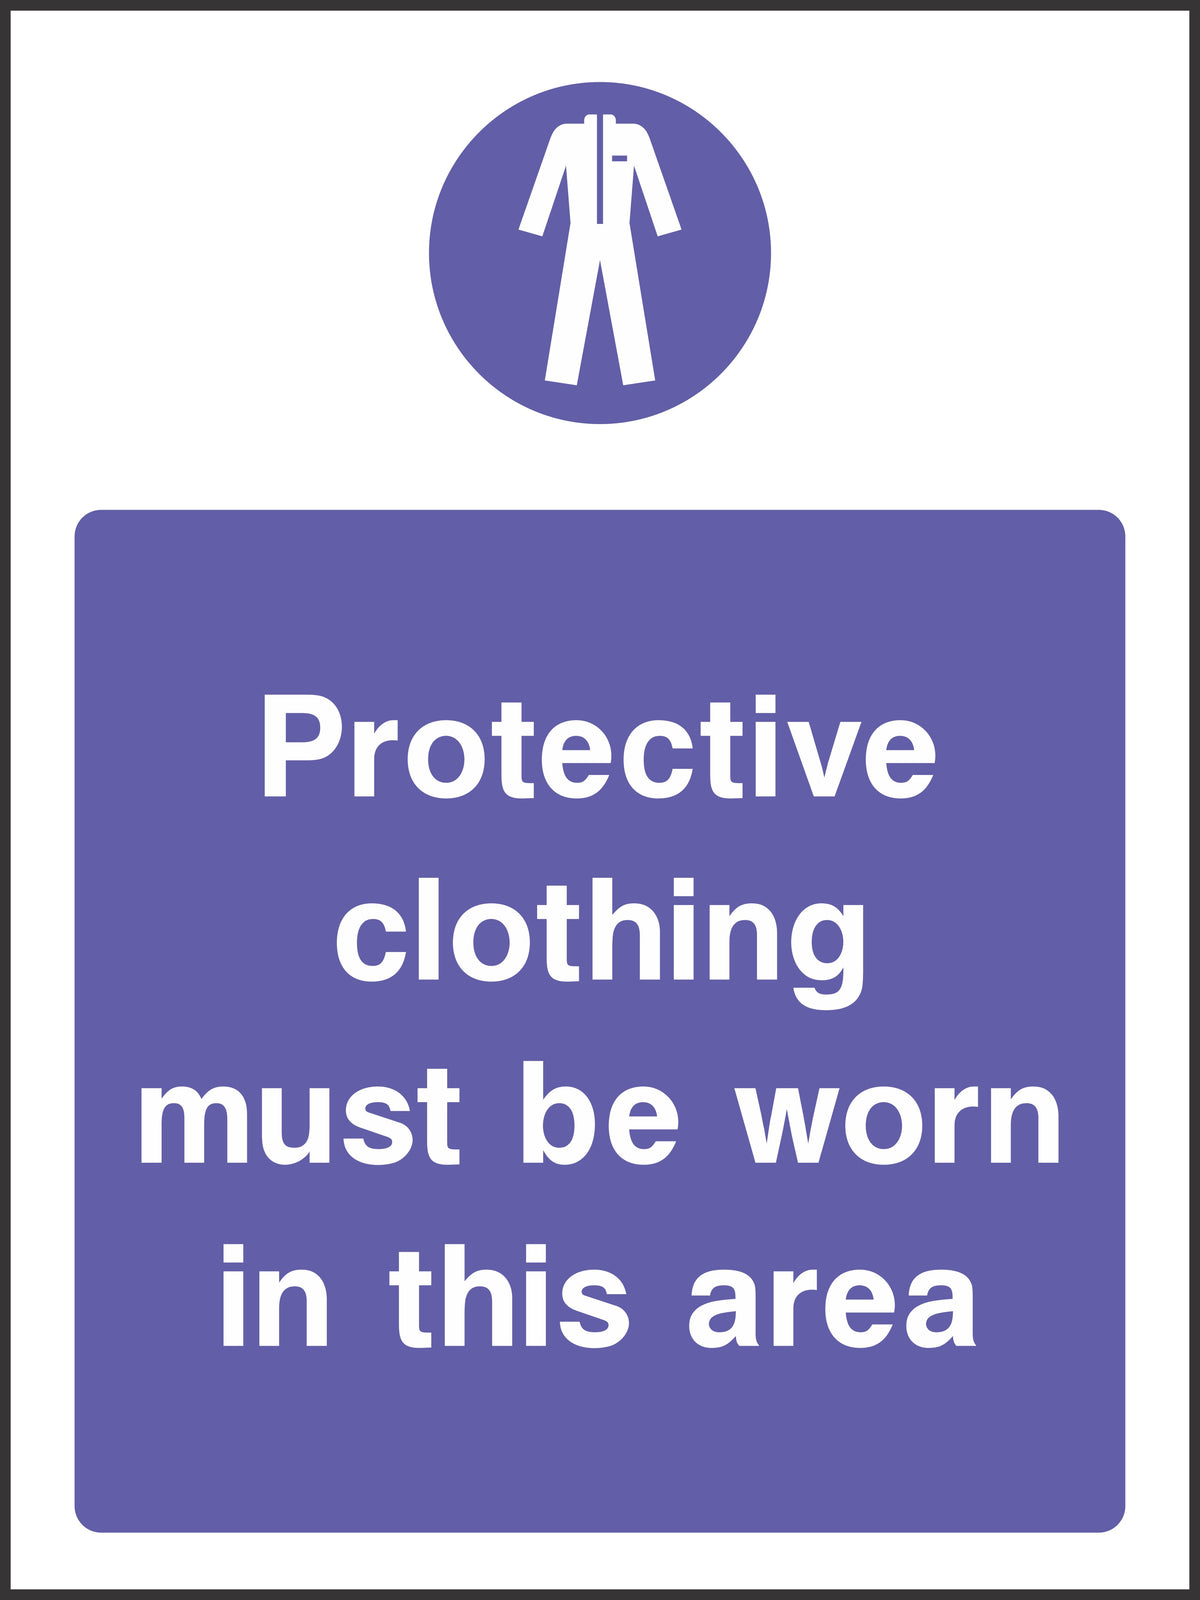 Protective clothing must be worn in this area sign